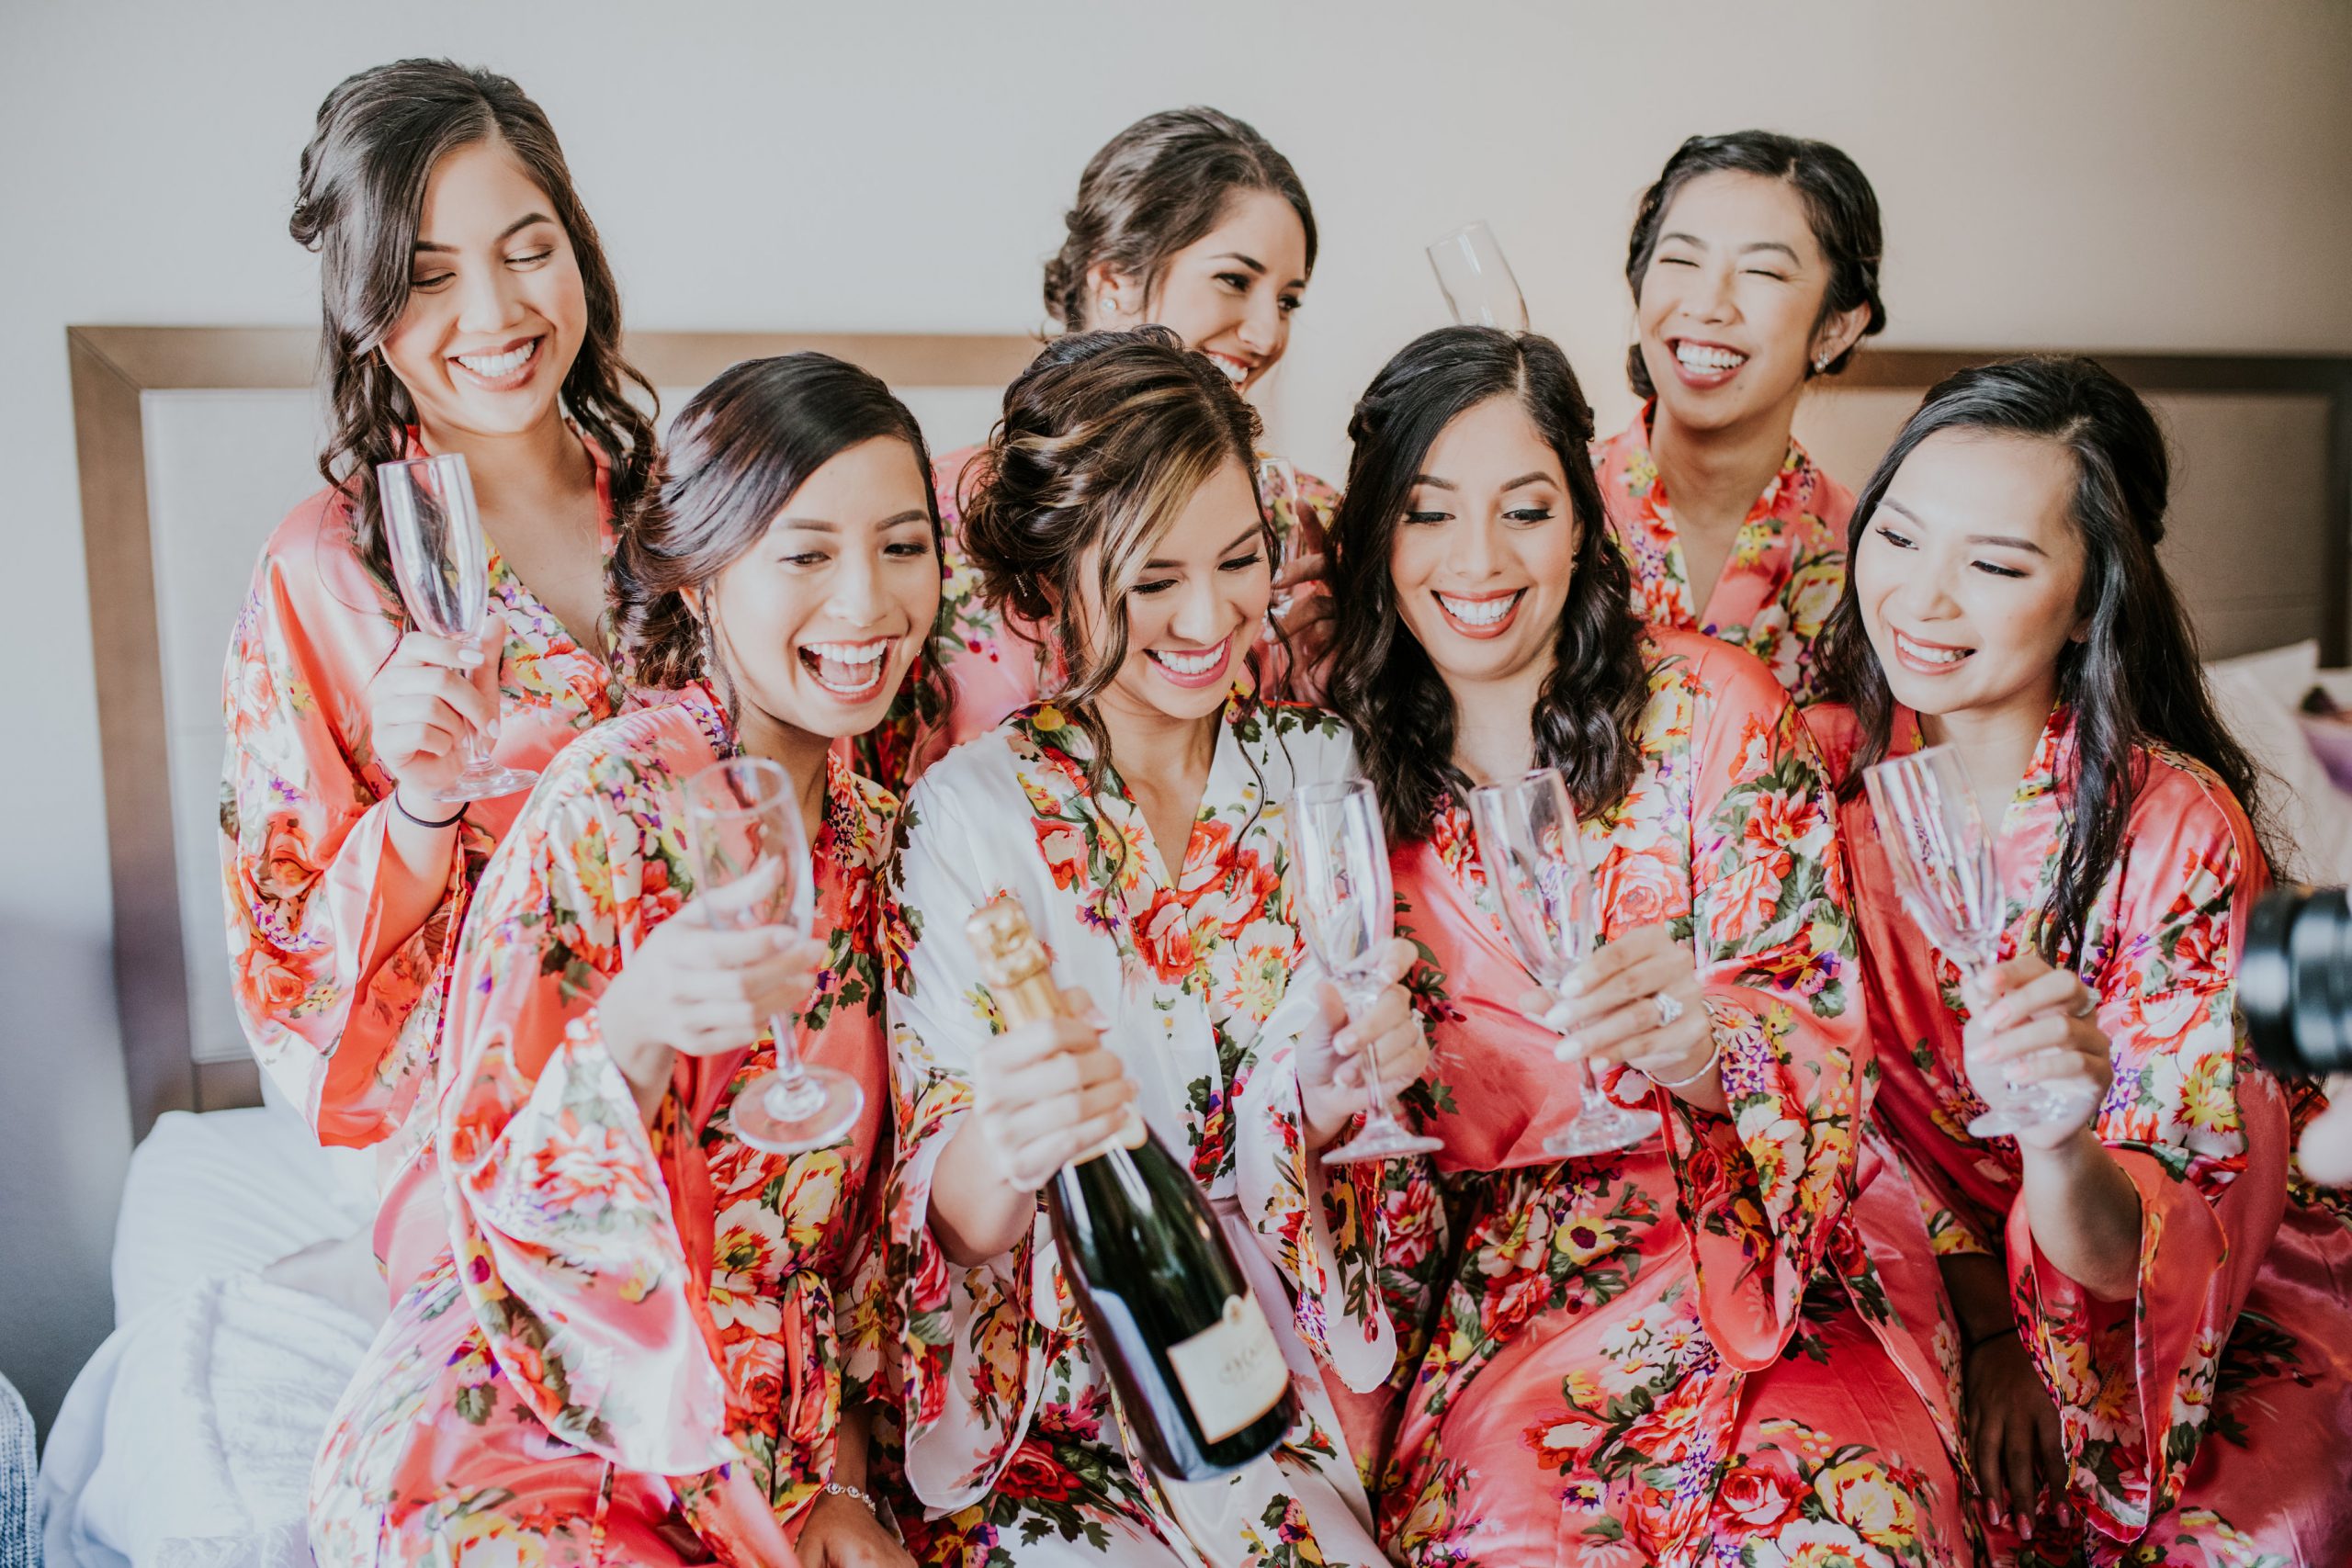 Bride with Her Bridesmaids at Bridal Shower